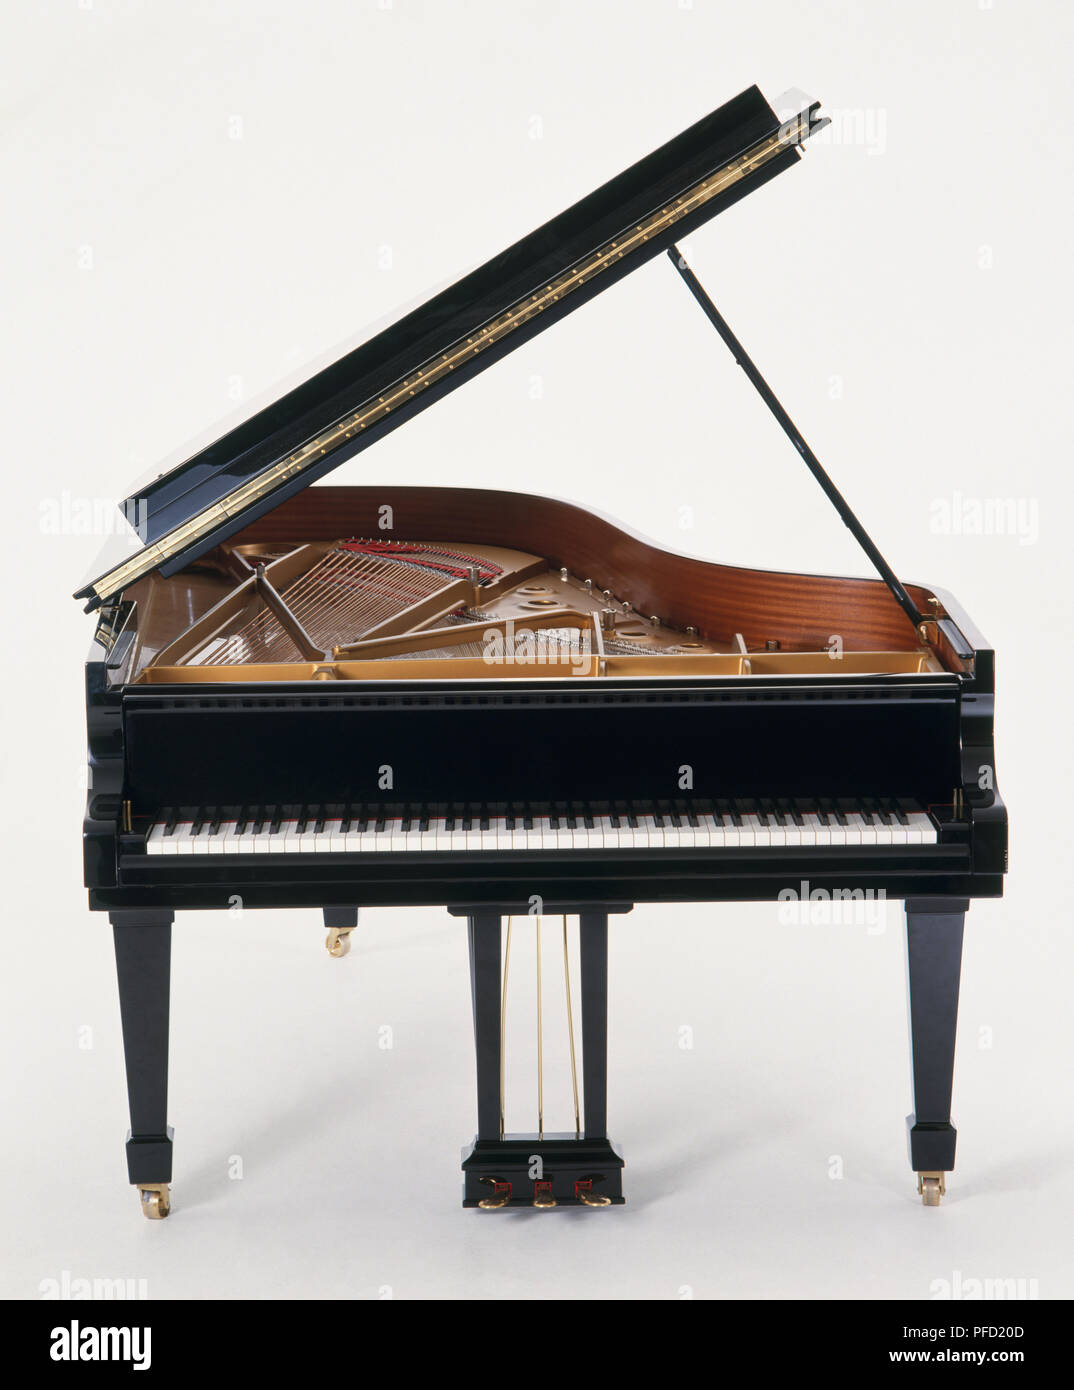 Grand piano, front view Stock Photo - Alamy